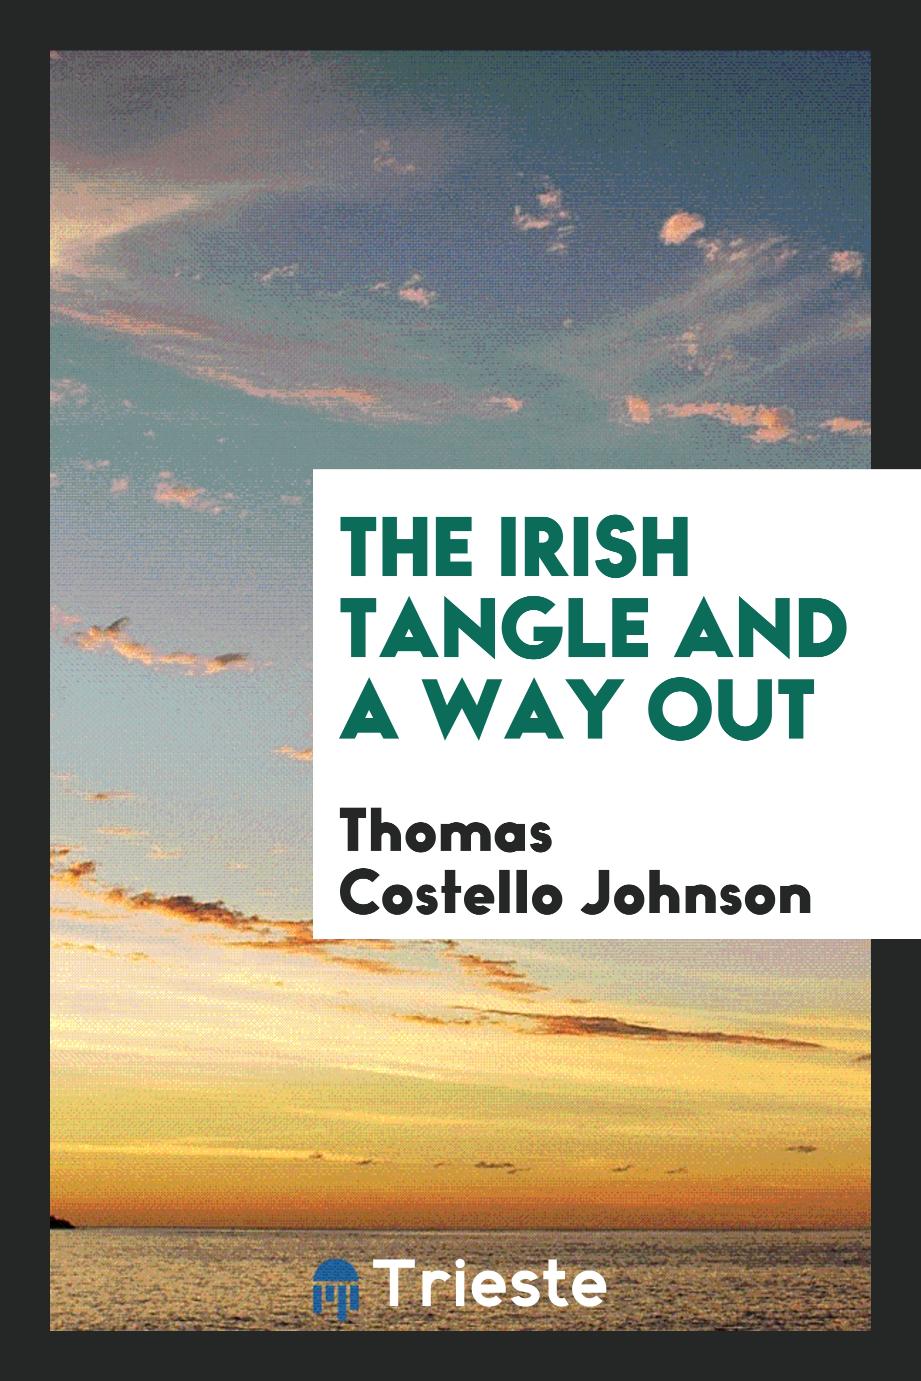 The Irish tangle and a way out